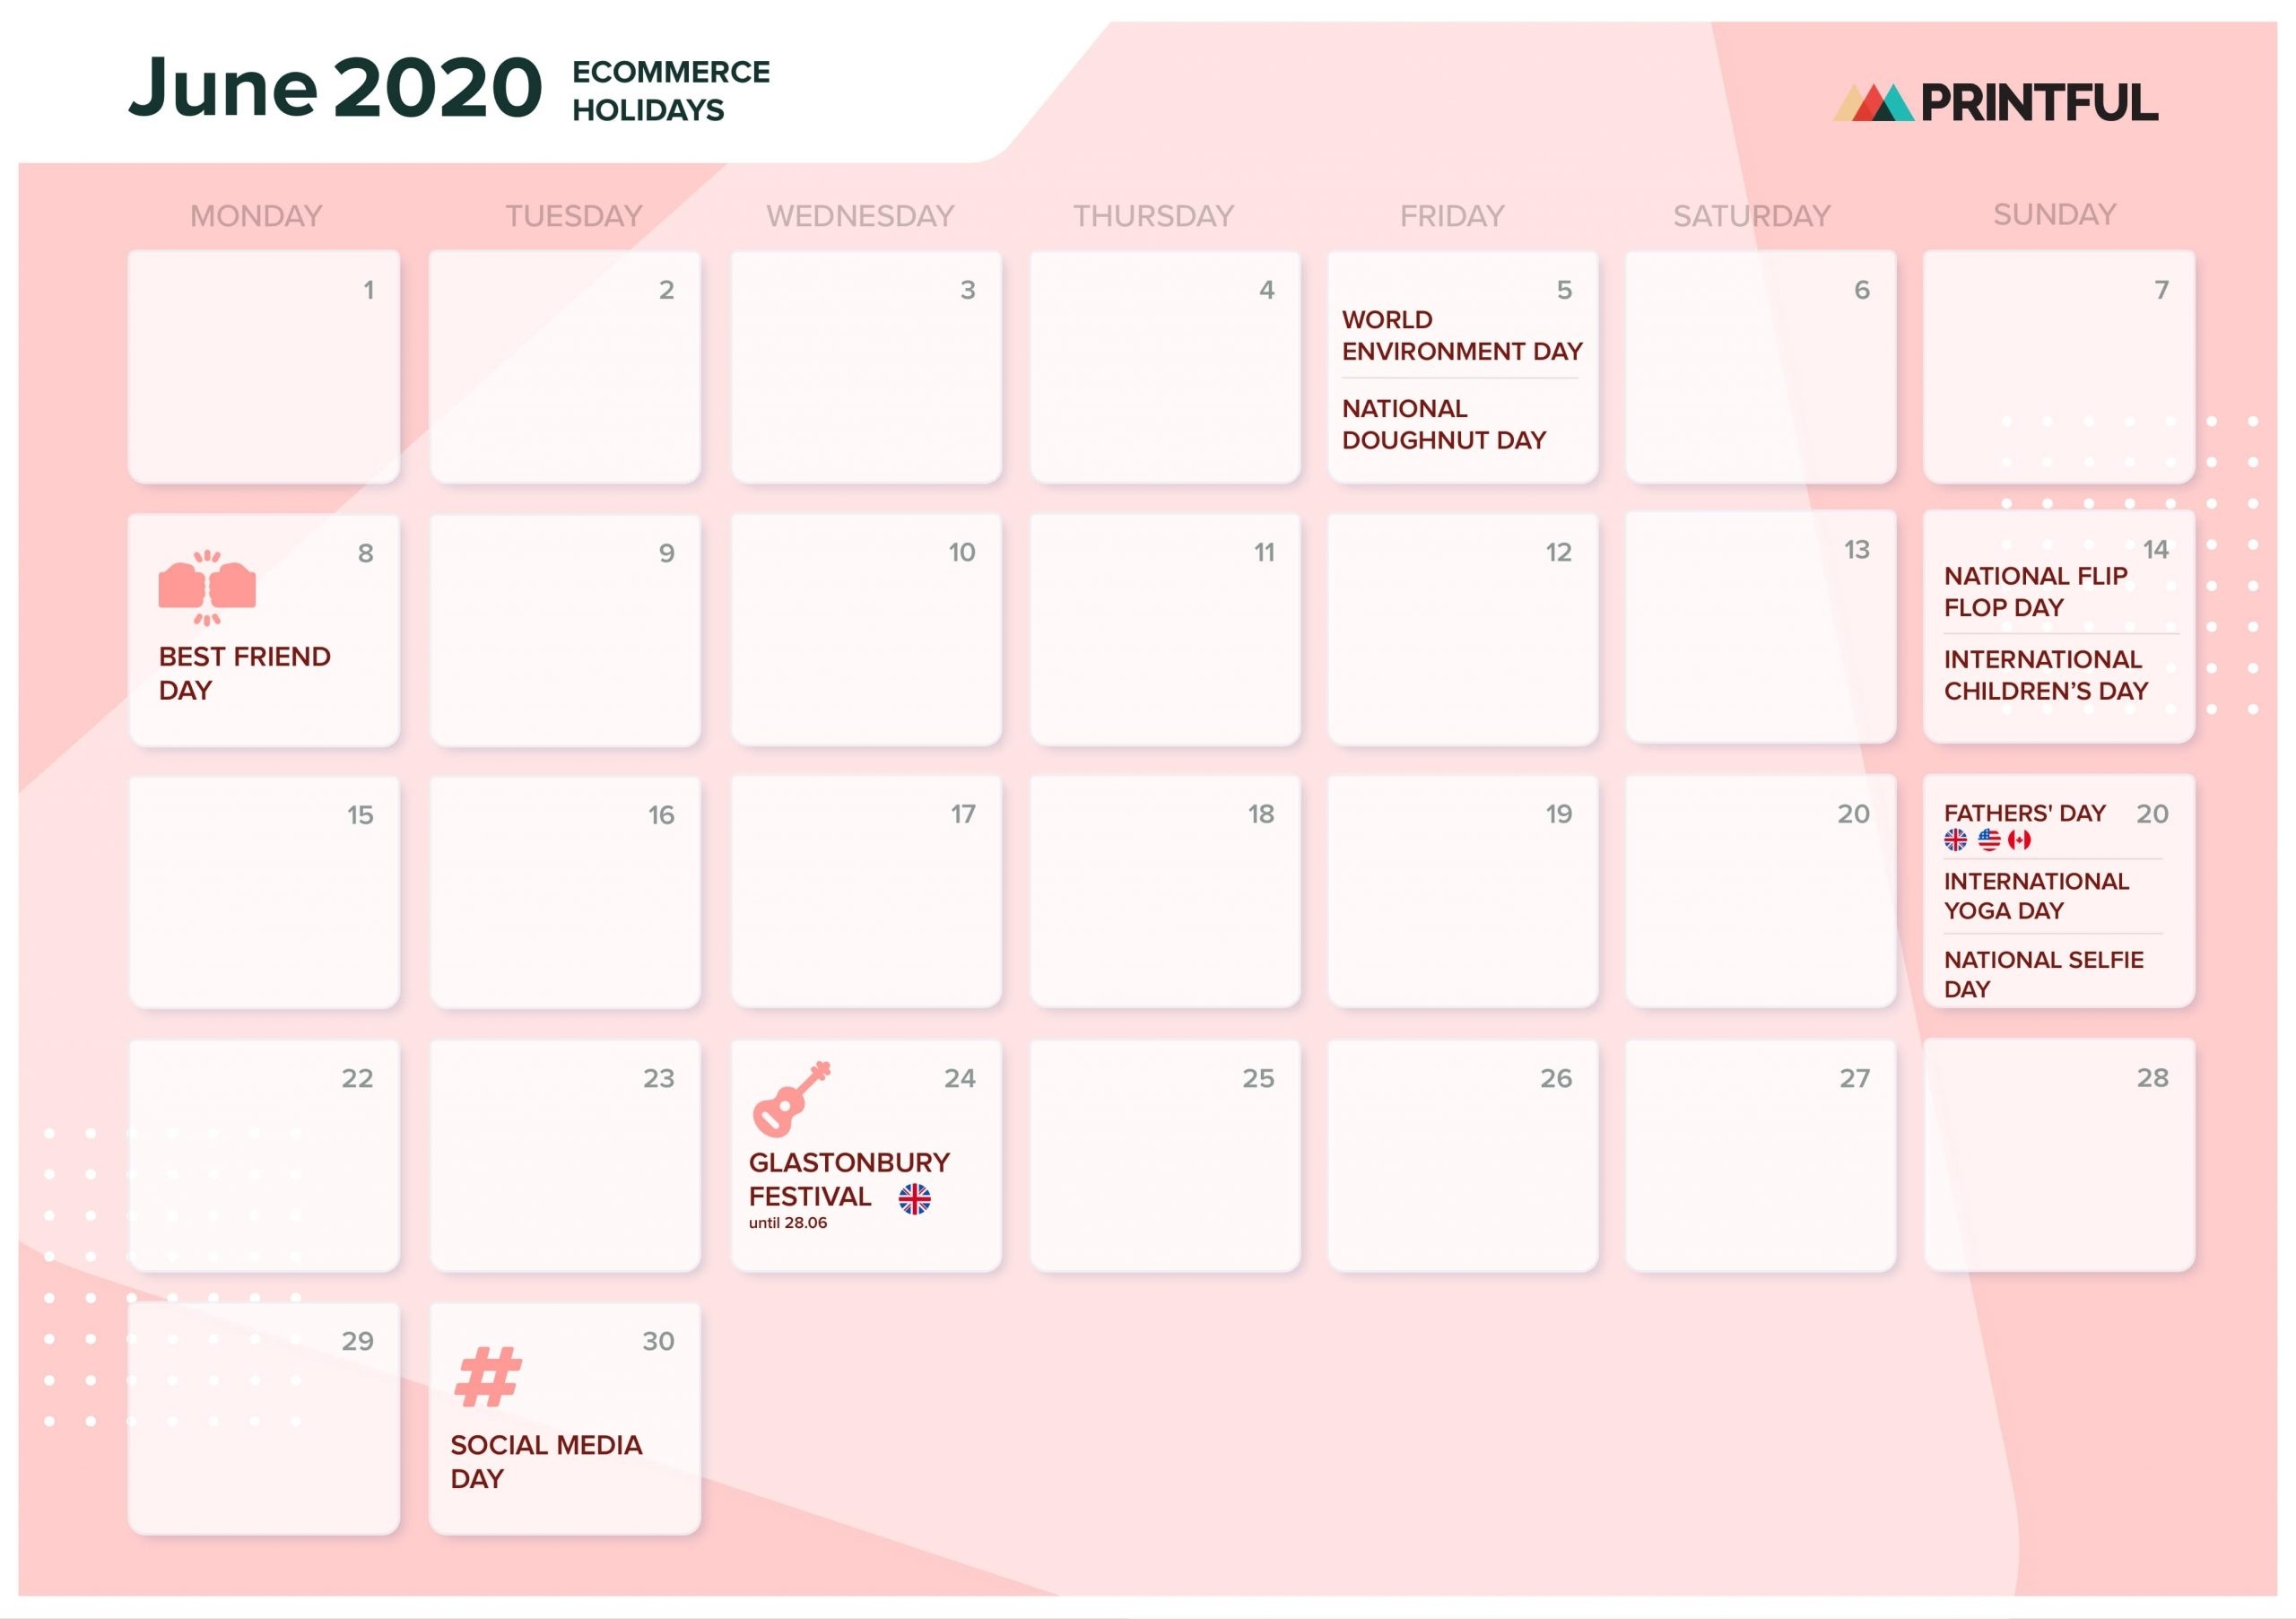 The Ultimate 2020 Ecommerce Holiday Marketing Calendar Calendar Of Religious Events For Canadian Jews In 2020